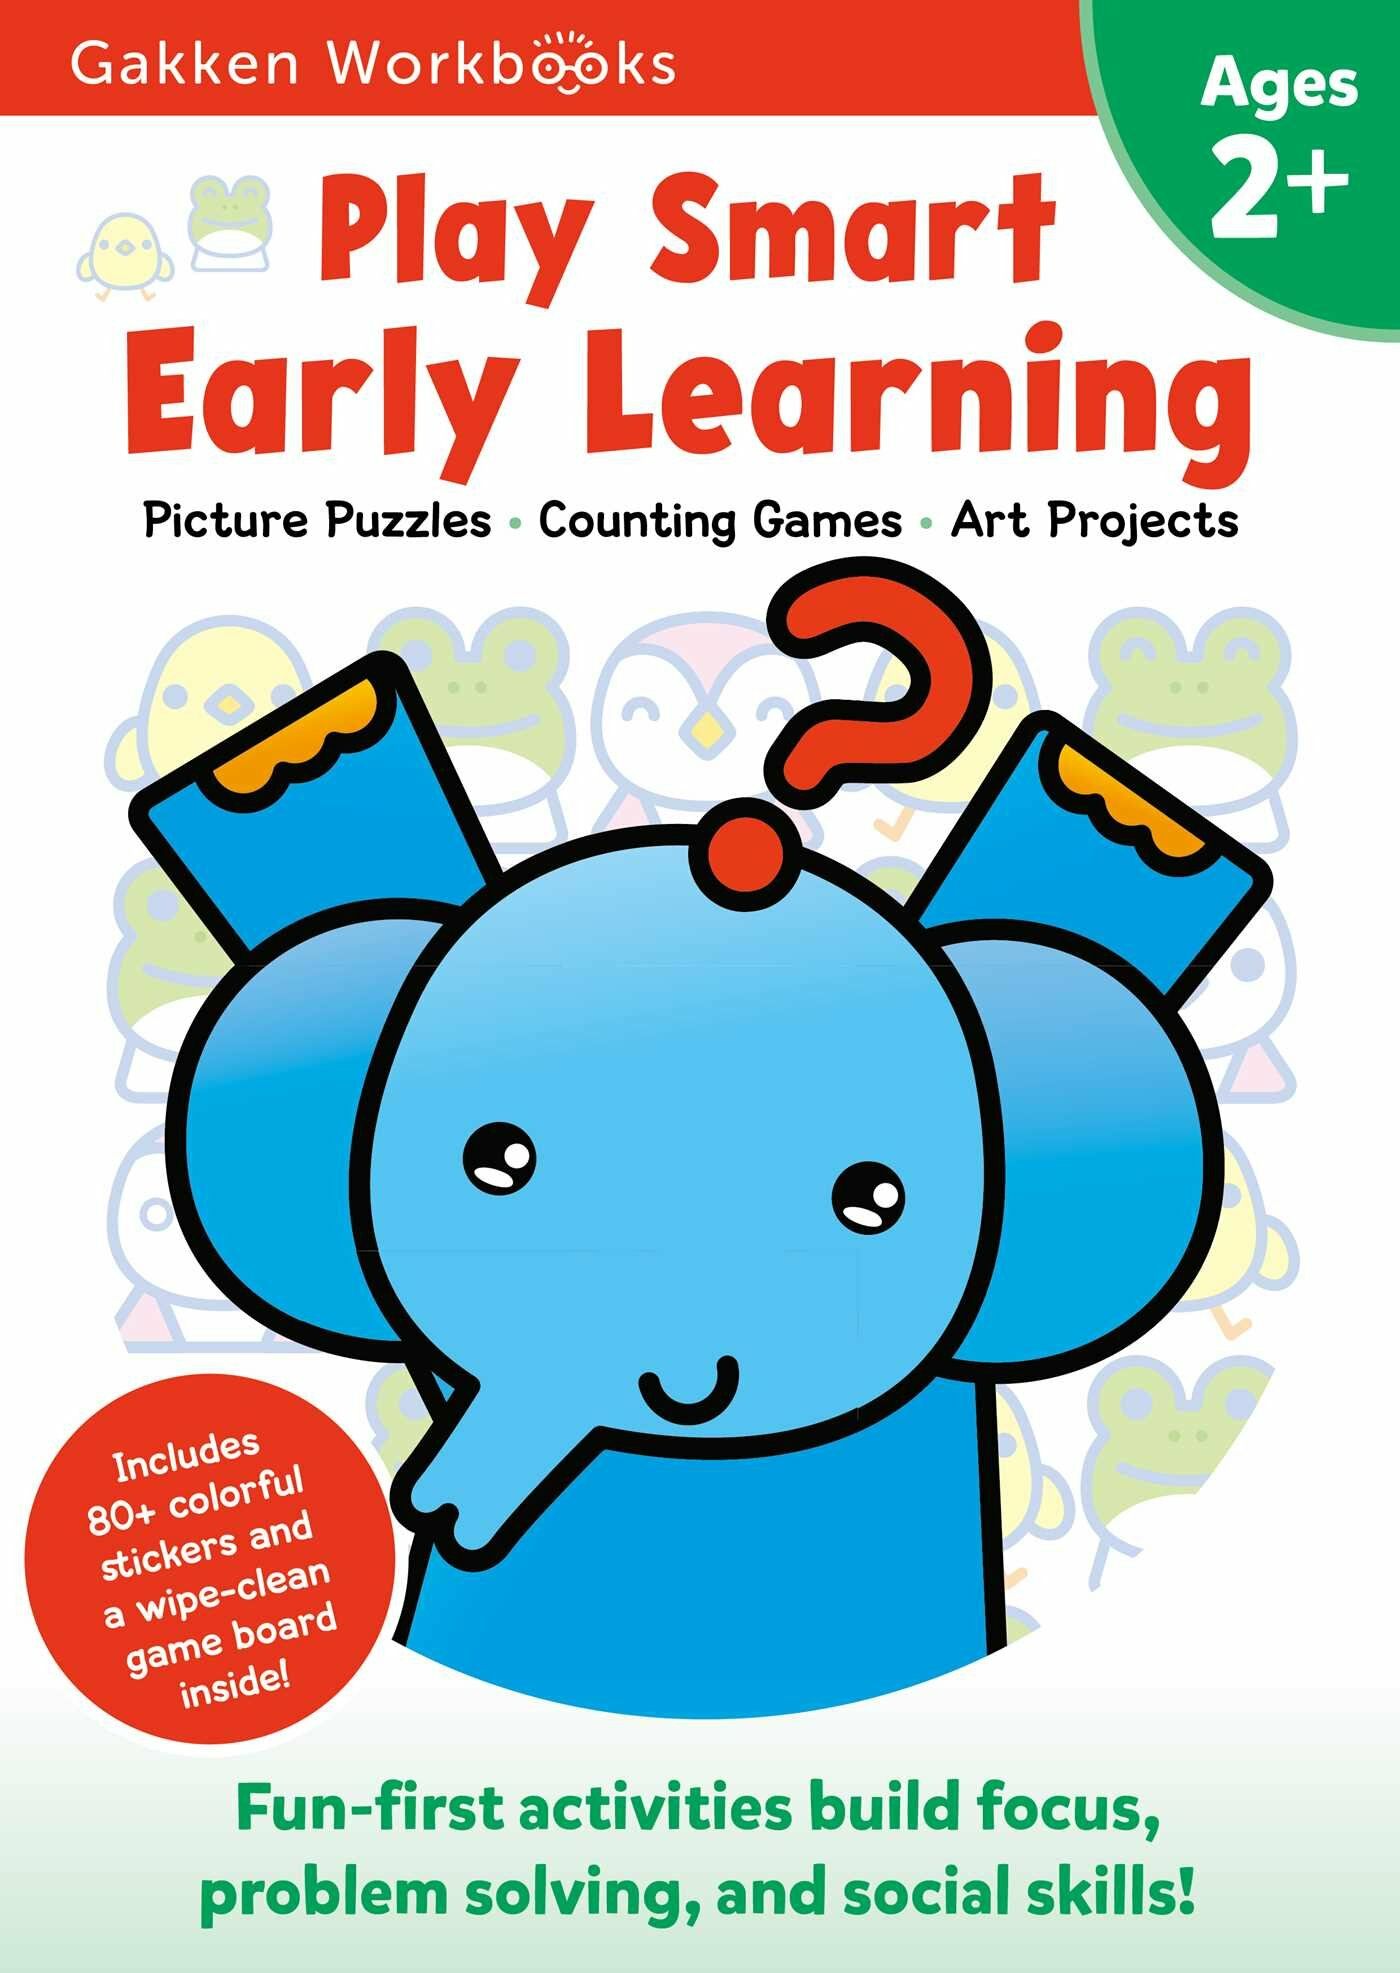 Play Smart Early Learning For Ages 2+ with Stickers (Paperback)